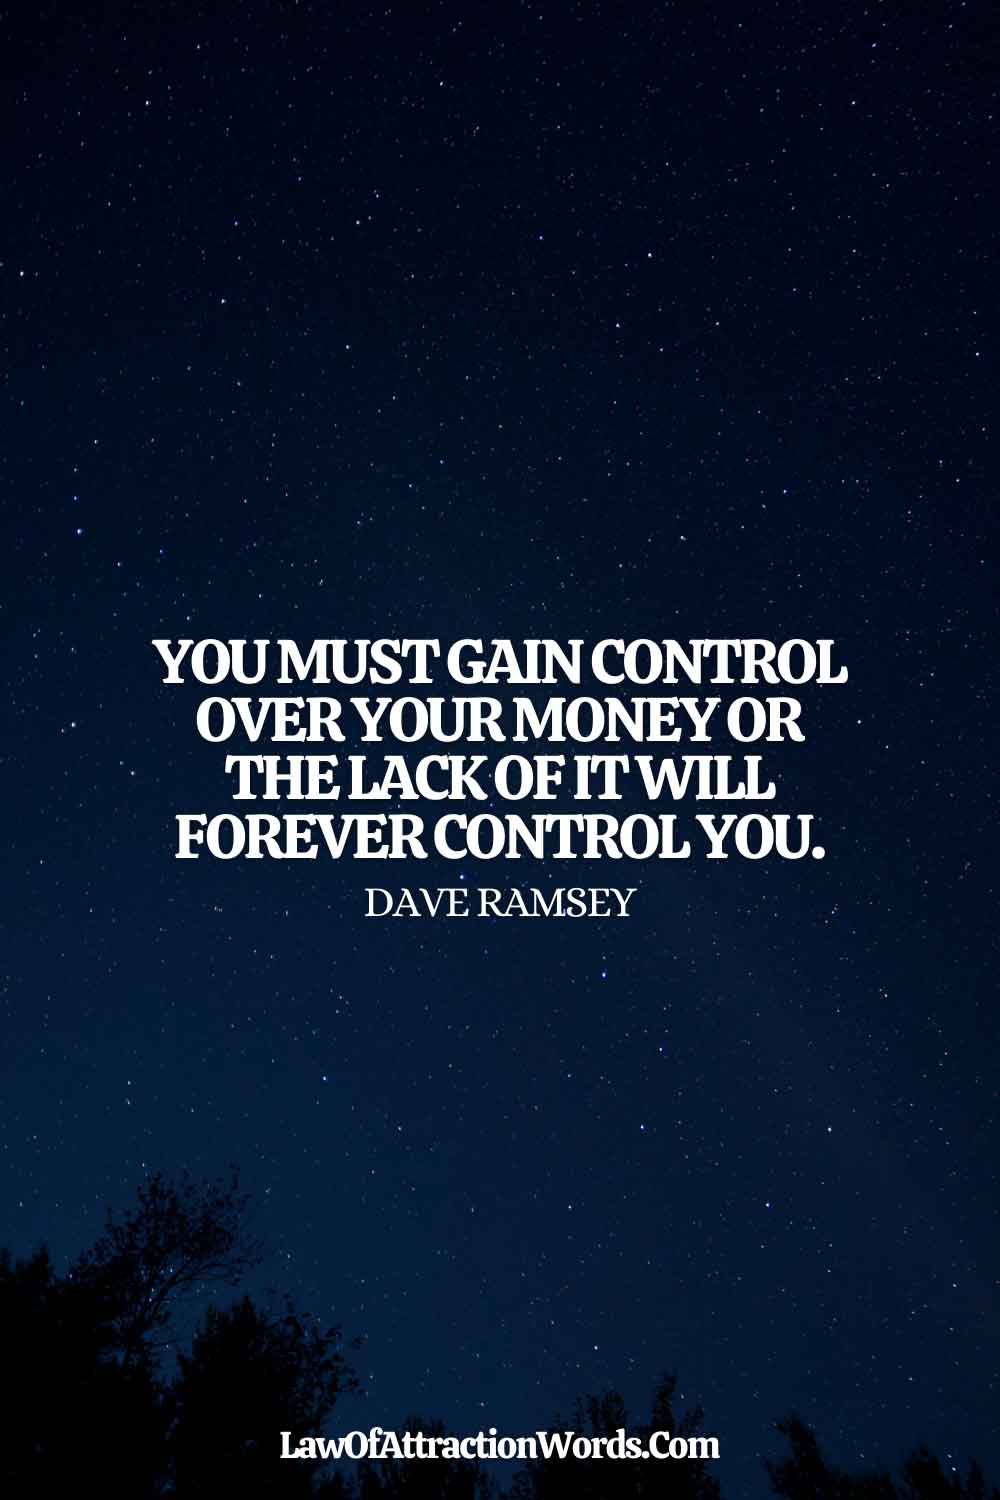 Inspirational Law Of Attraction Quotes Money